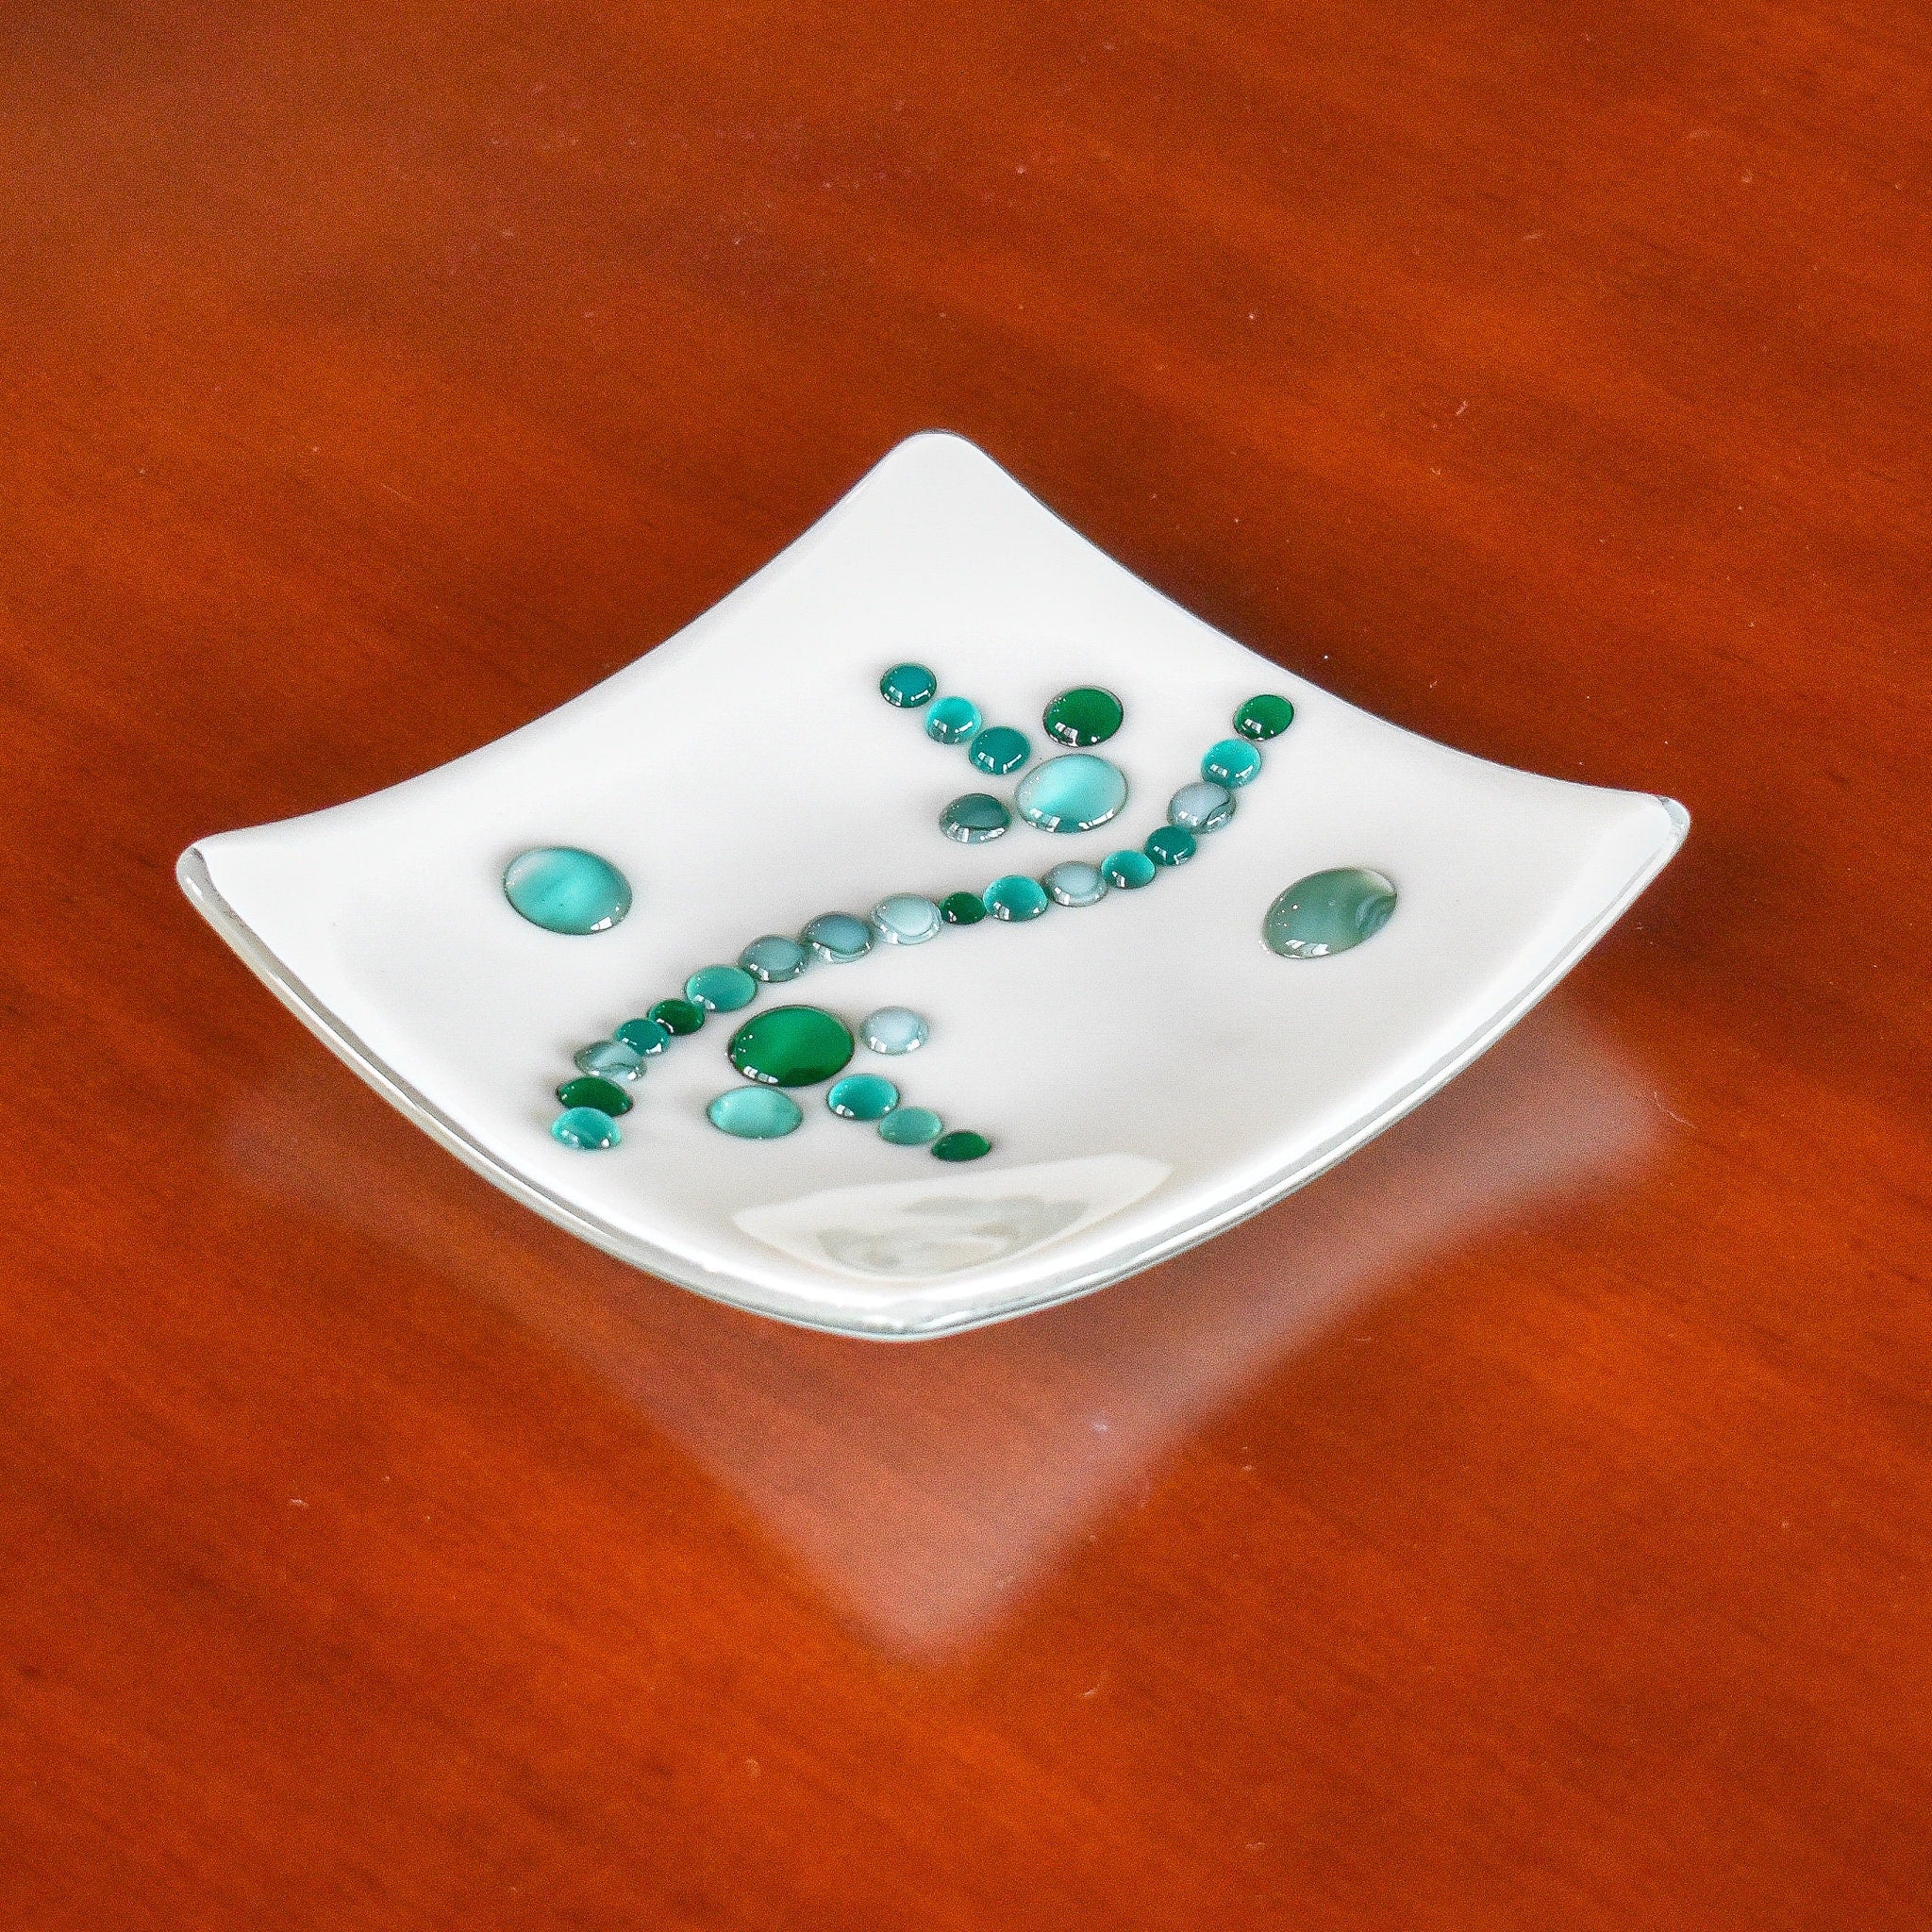 Small Modern Square Fused Glass Catchall Tray with Green Wave is a Welcome Gift for the Home, Perfect for Organizing your Space